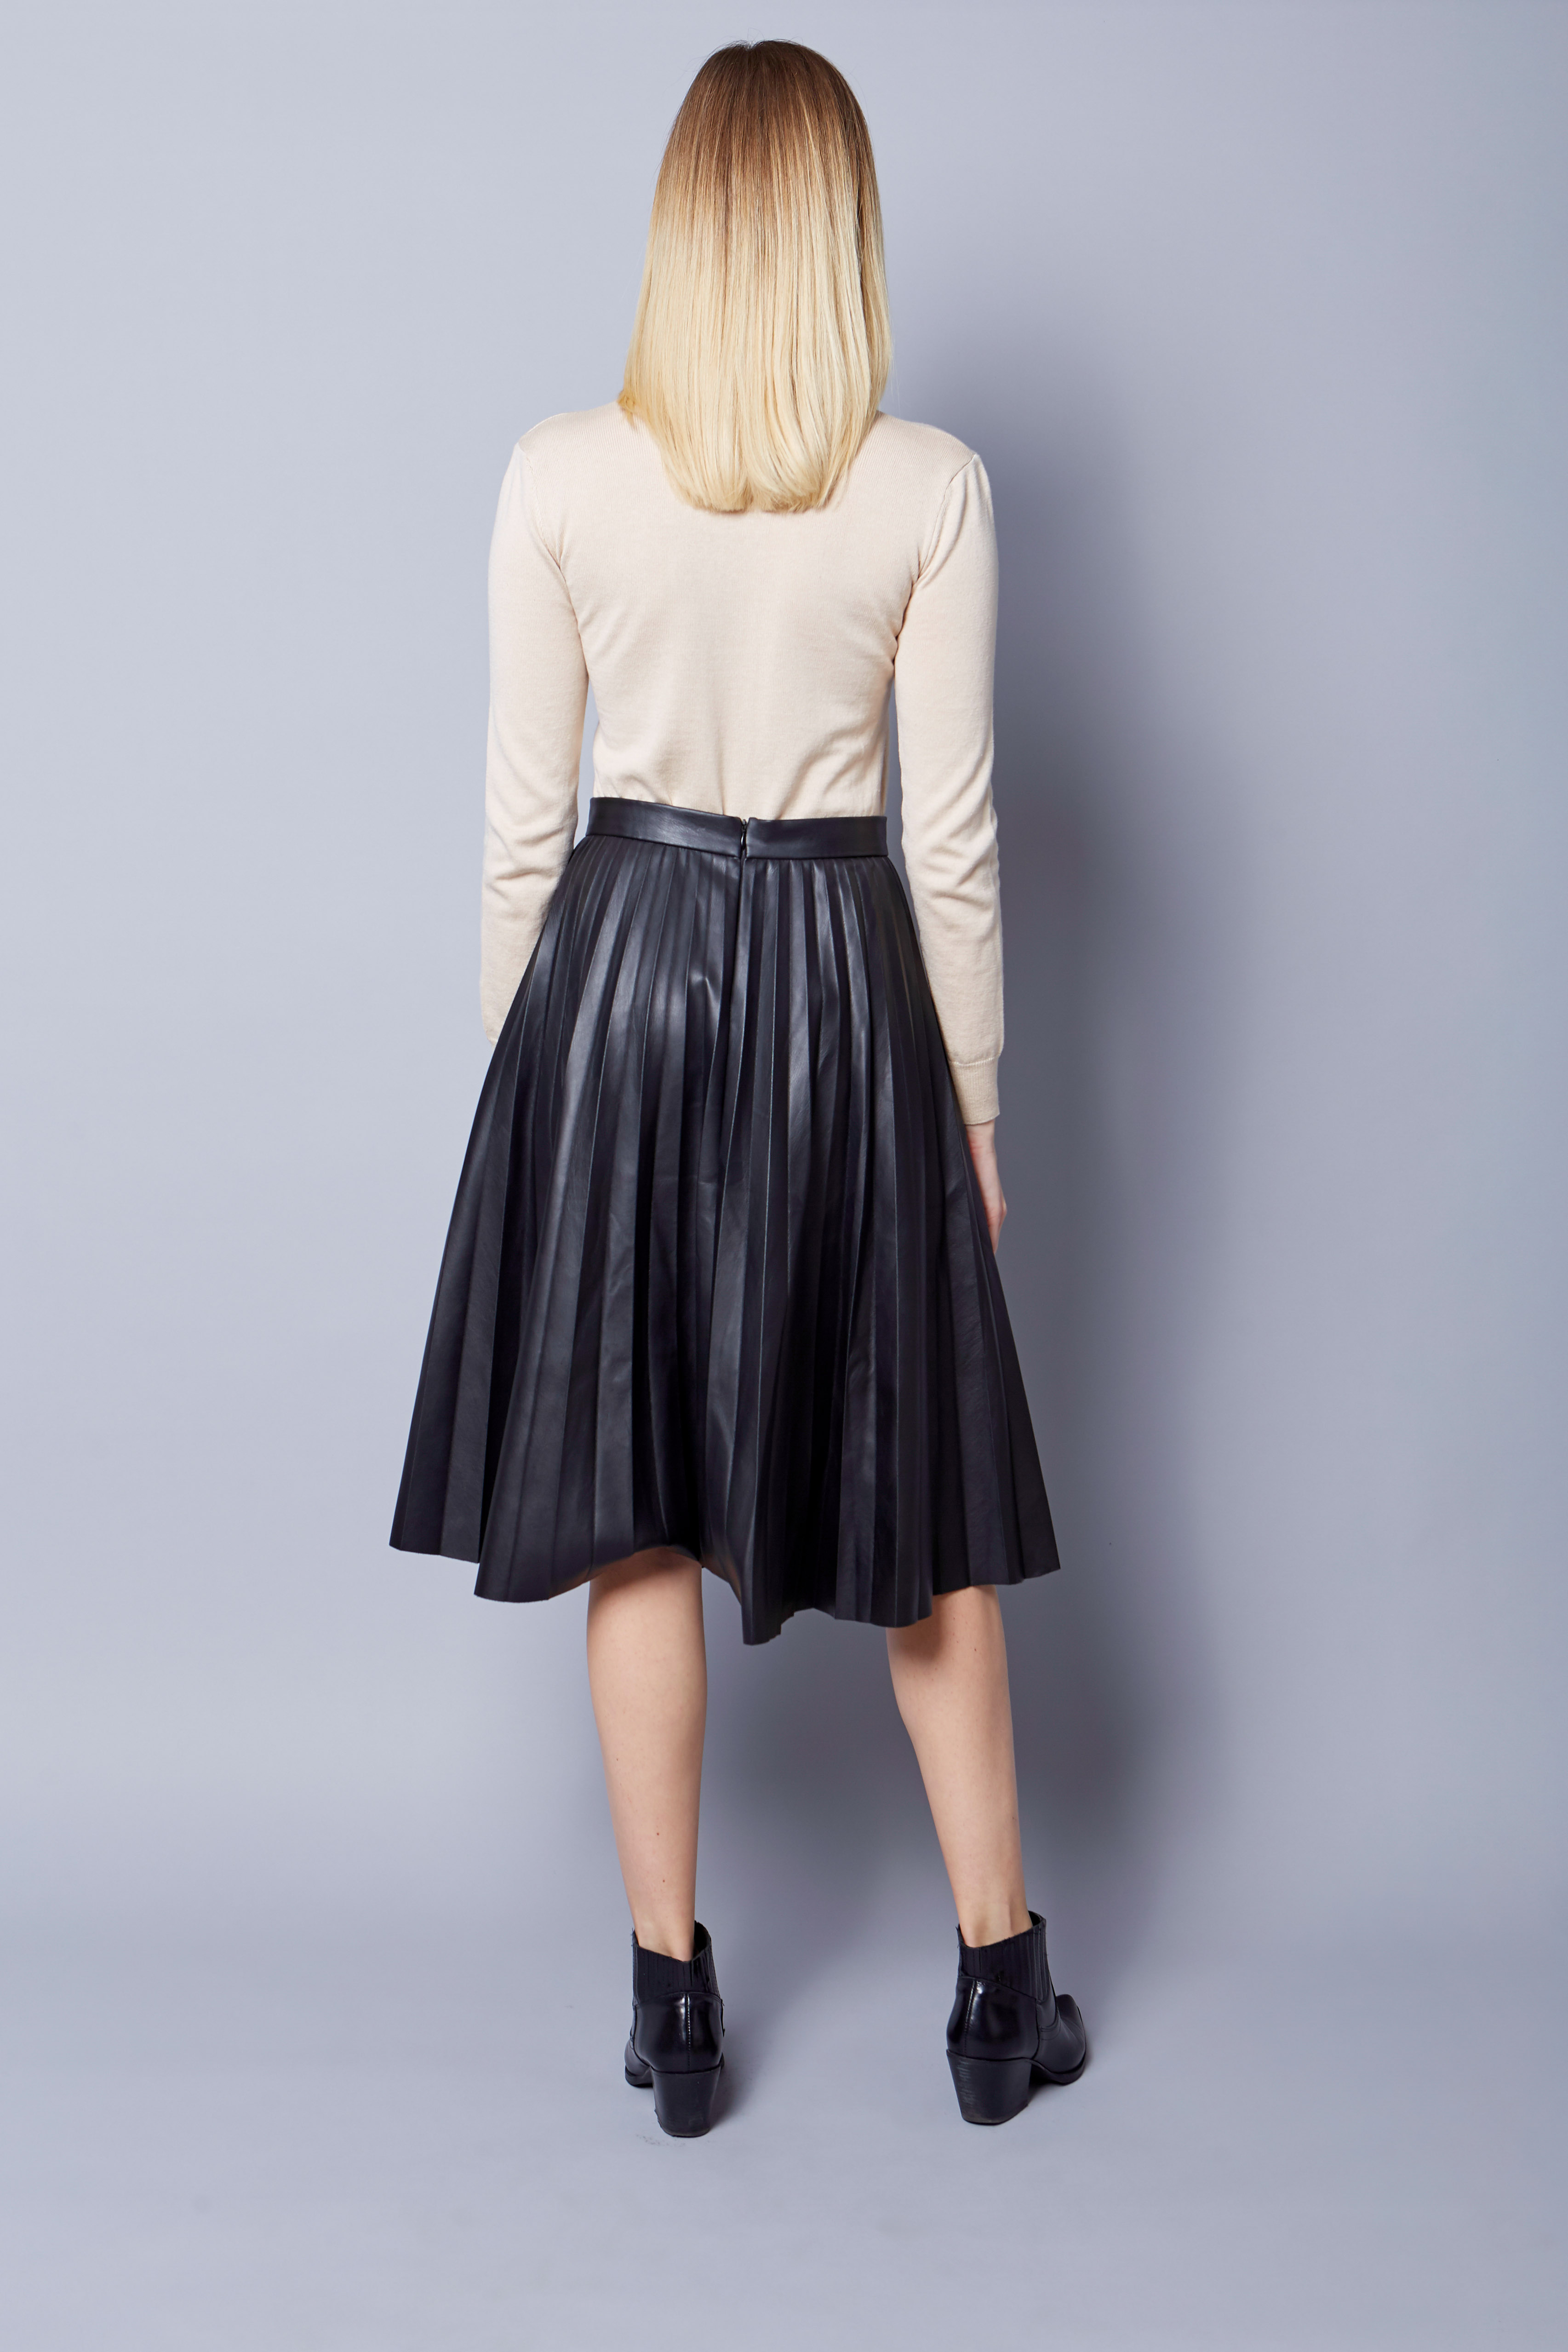 Below the knee pleated black eco-leather skirt, photo 4